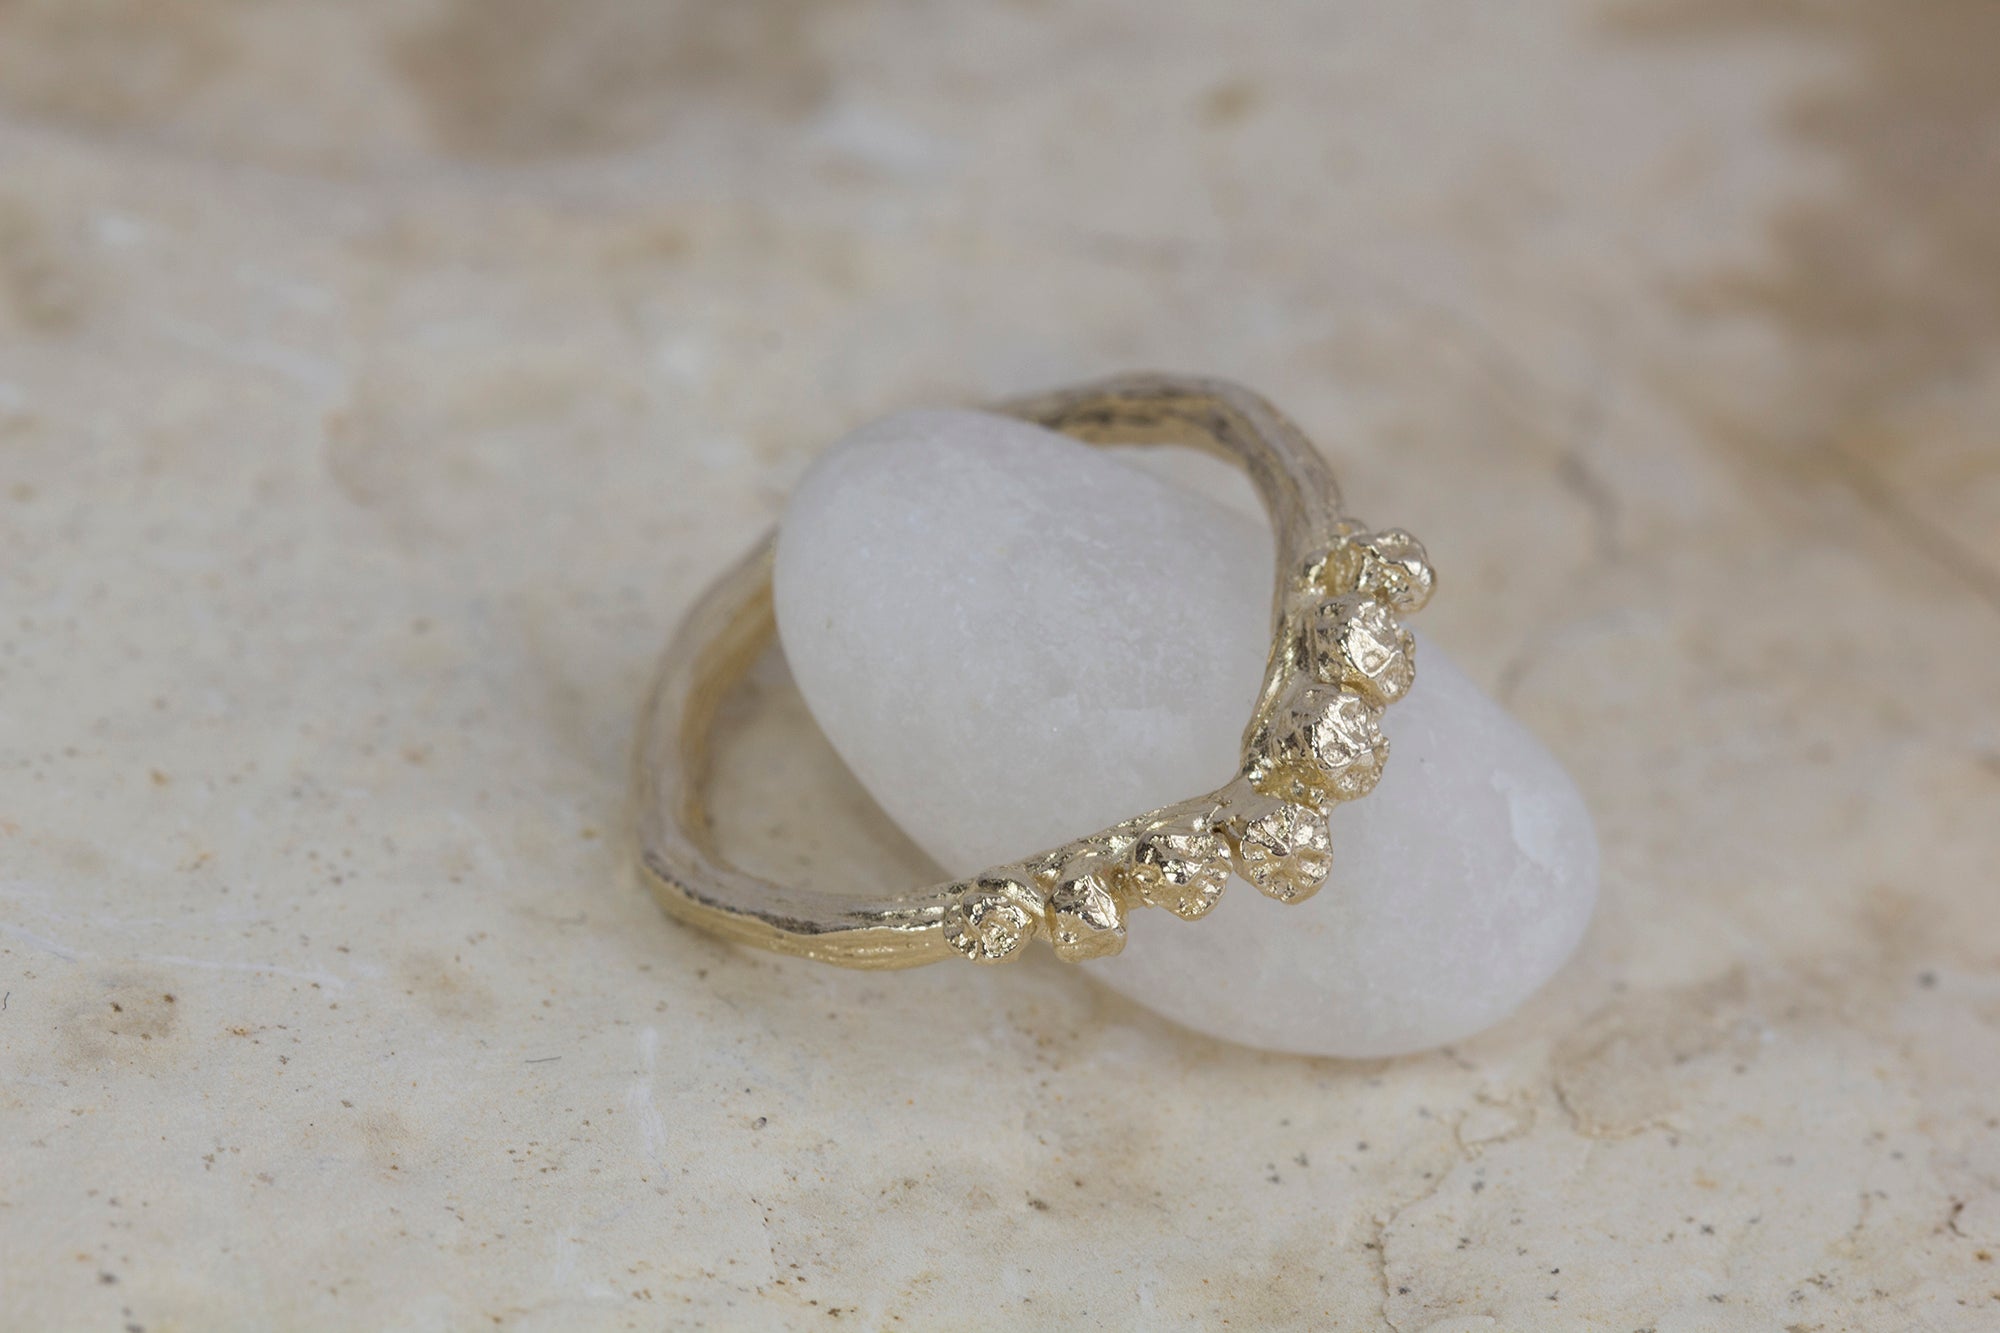 Chevron V shape gold ring cast from twigs and berries pictured on a quartz rock. 